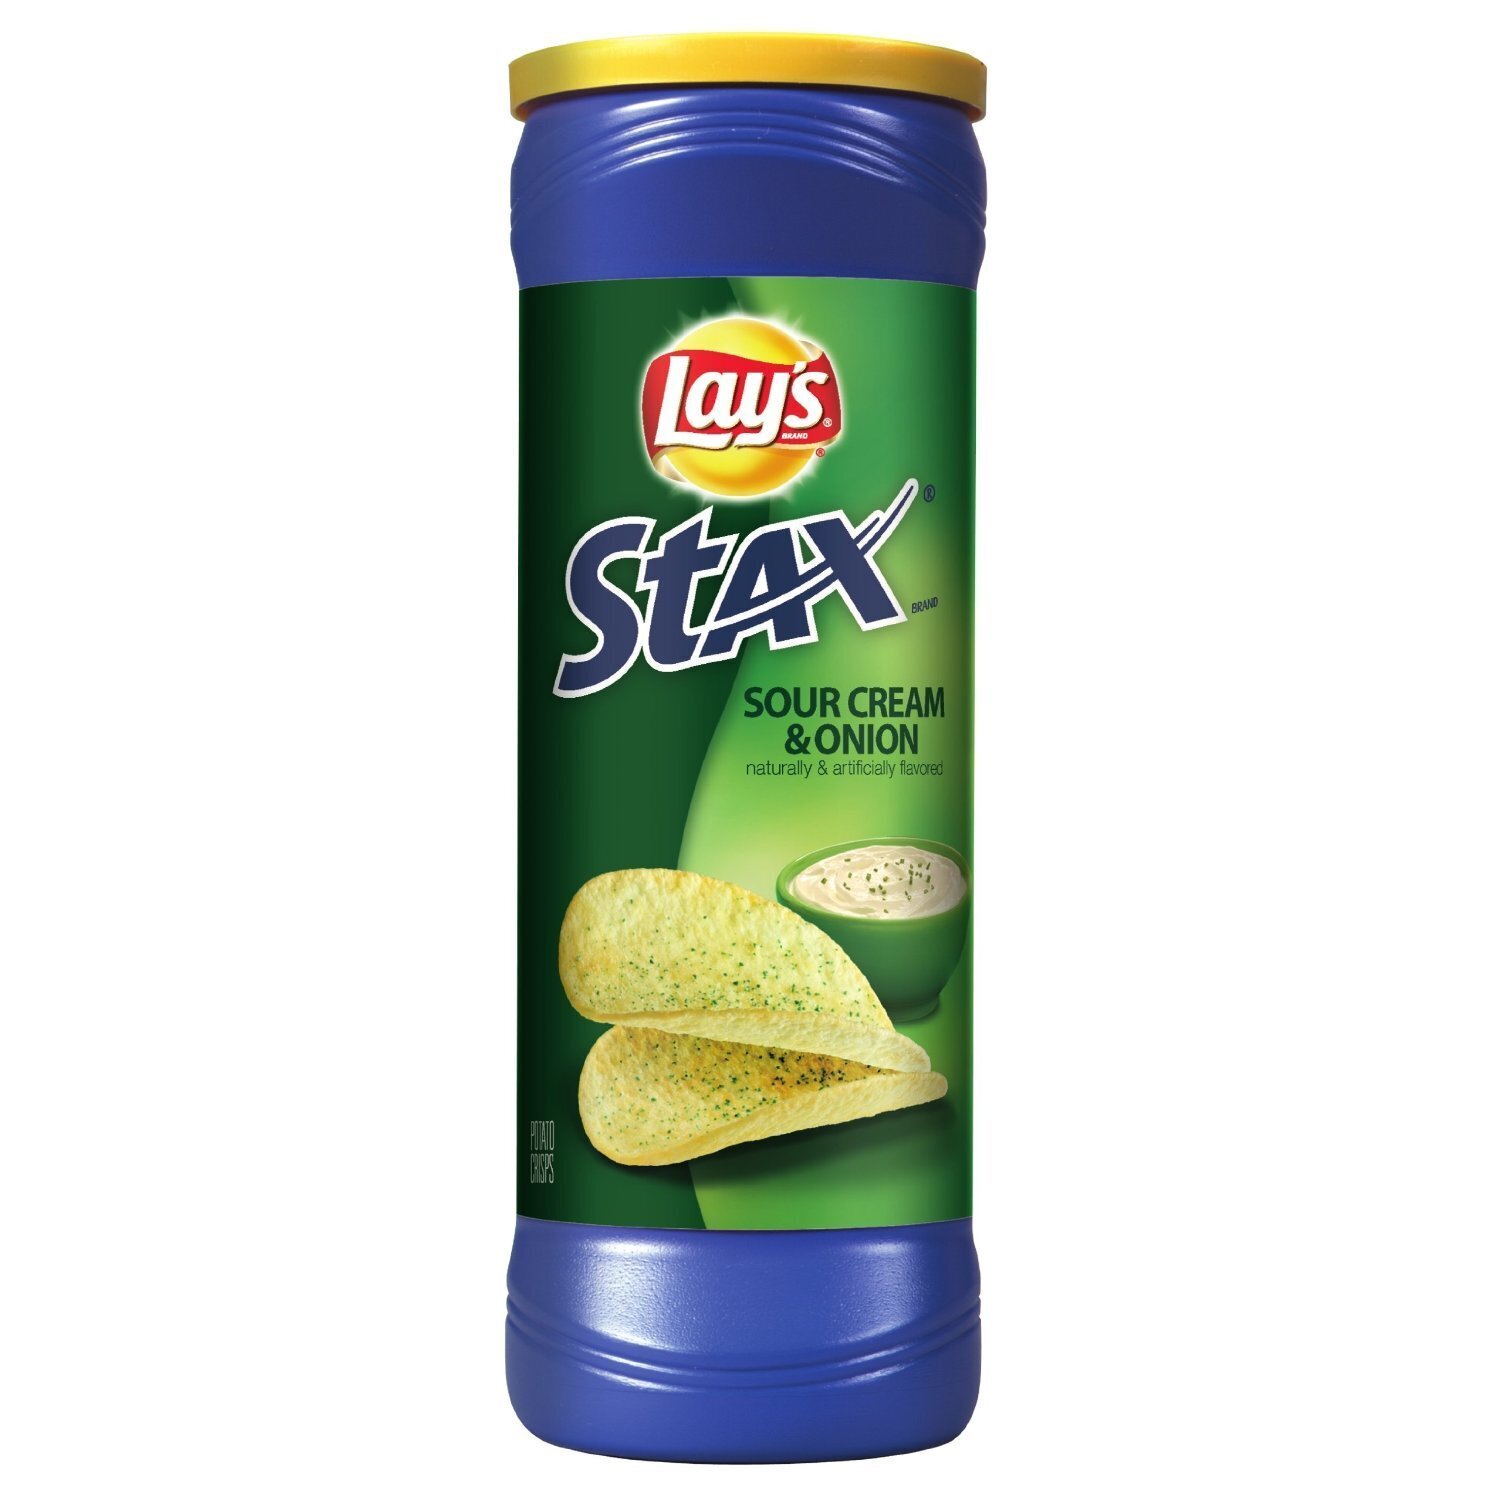 Lays Stax - Sour Cream & Onion Chips  155g